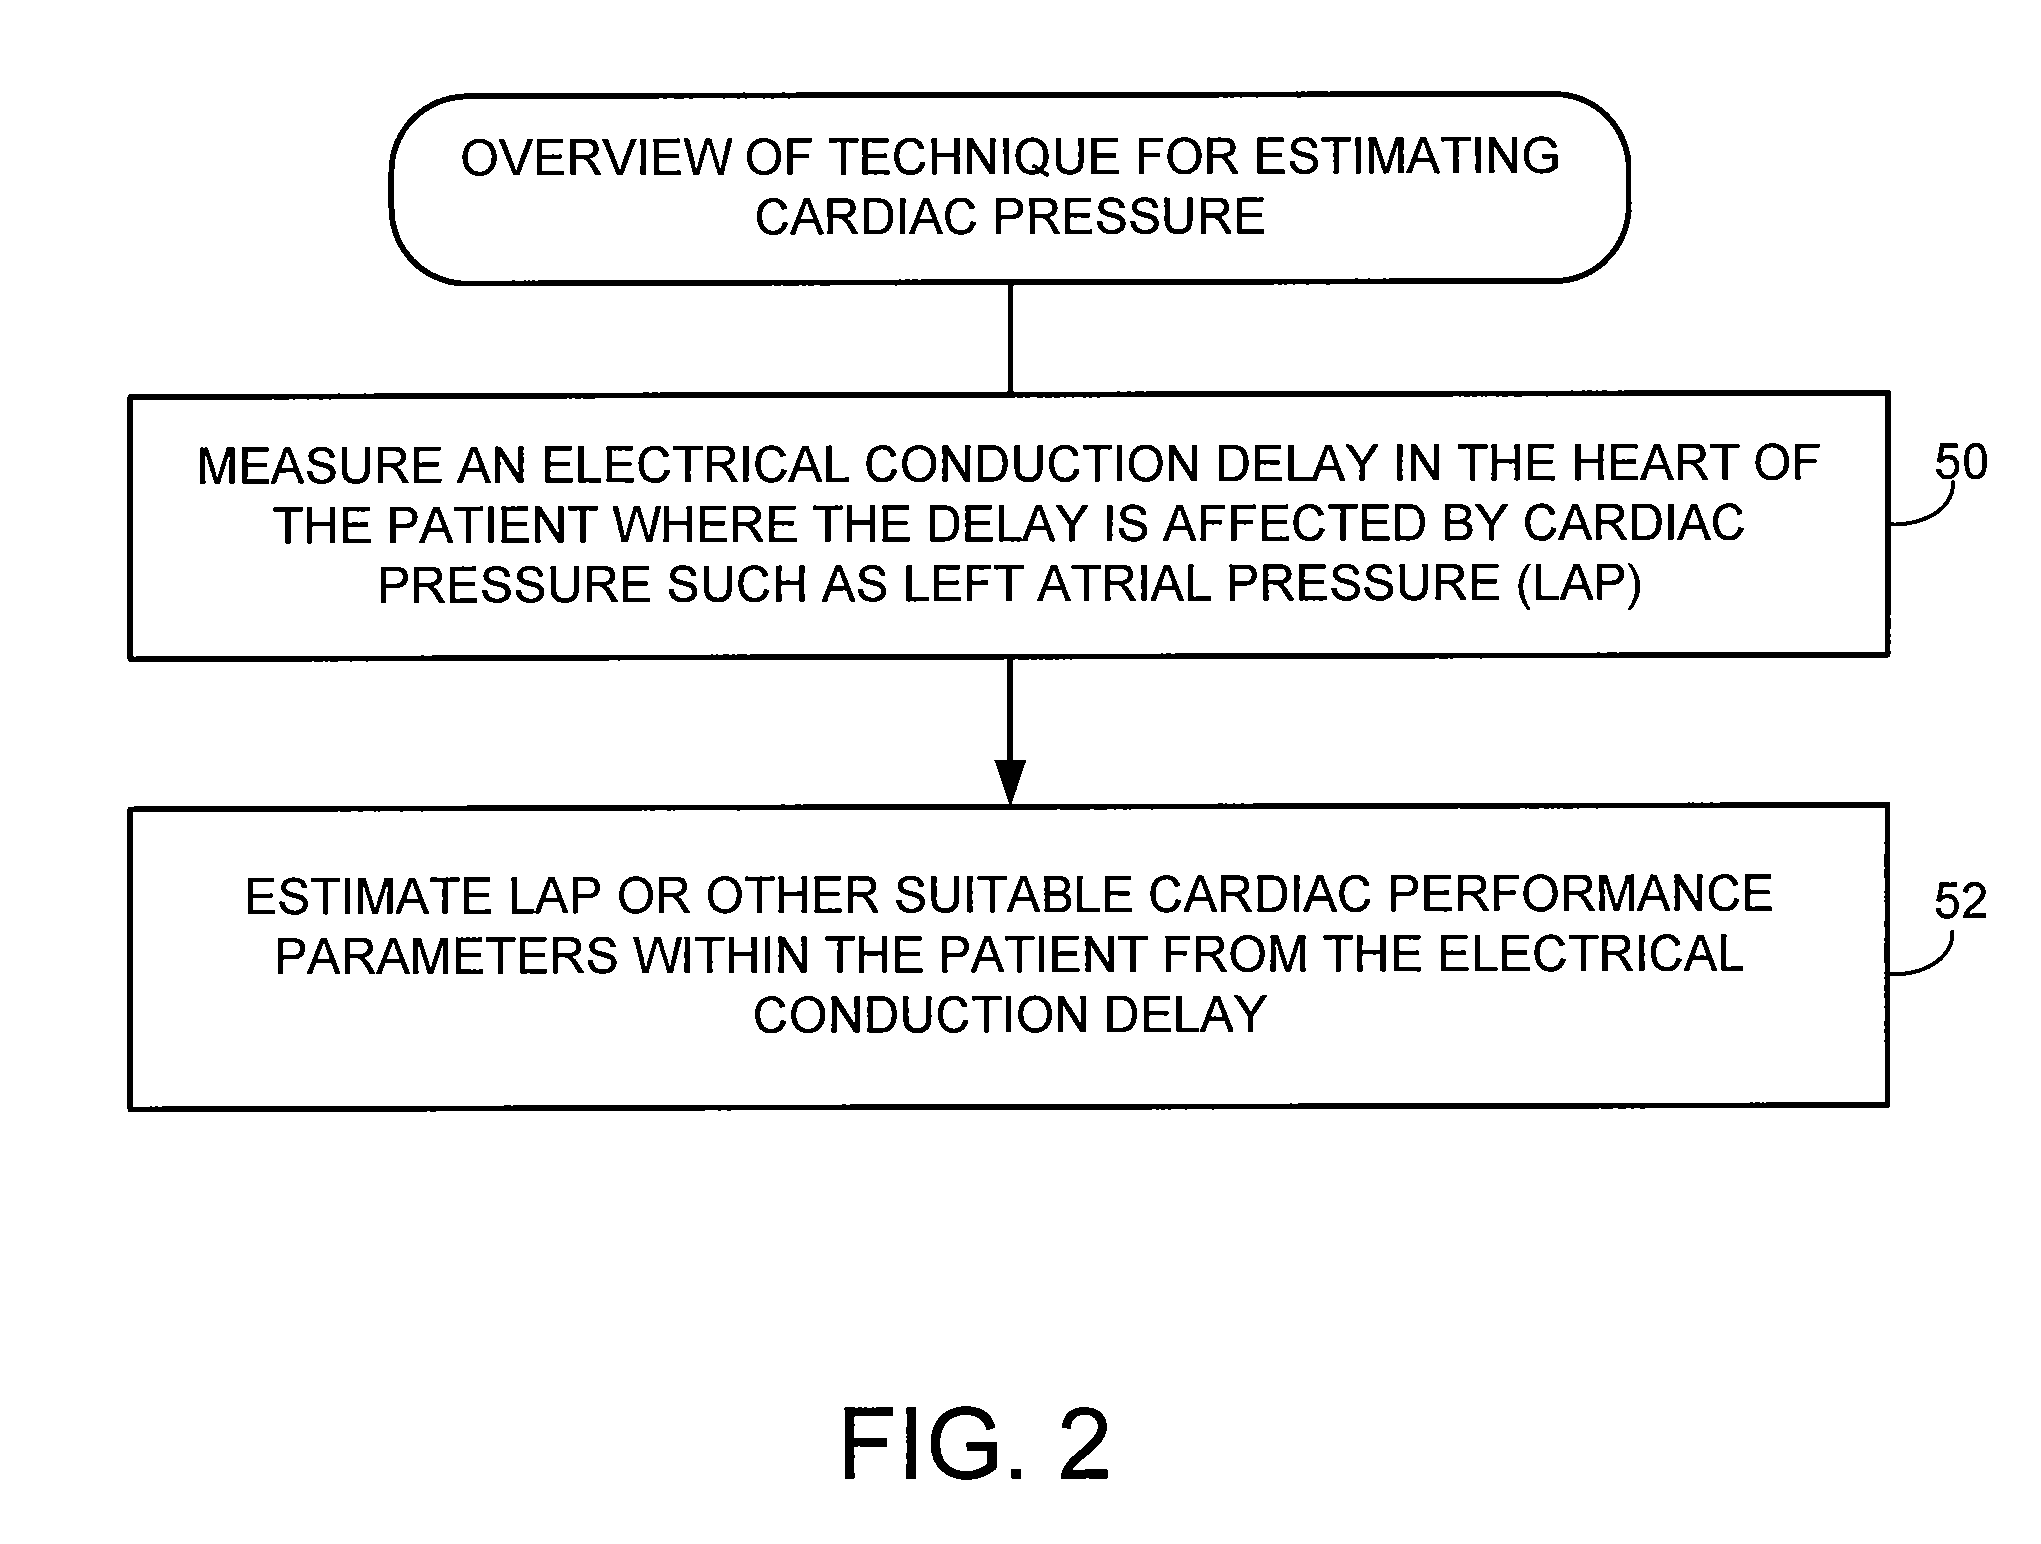 System and method for estimating electrical conduction delays from immittance values measured using an implantable medical device